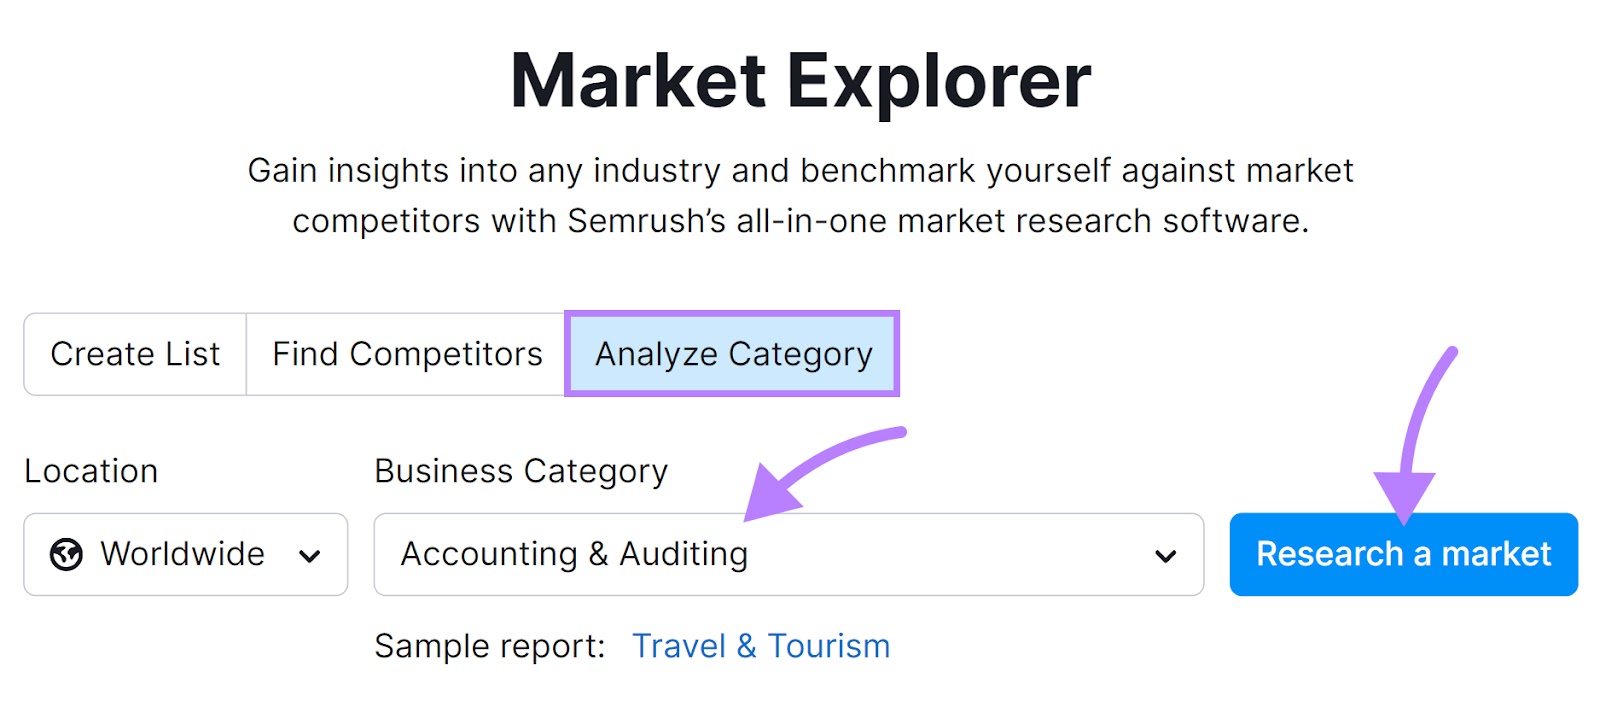 “Analyze Category” tab selected for "Accounting & Auditing" concern  class  successful  Market Explorer tool